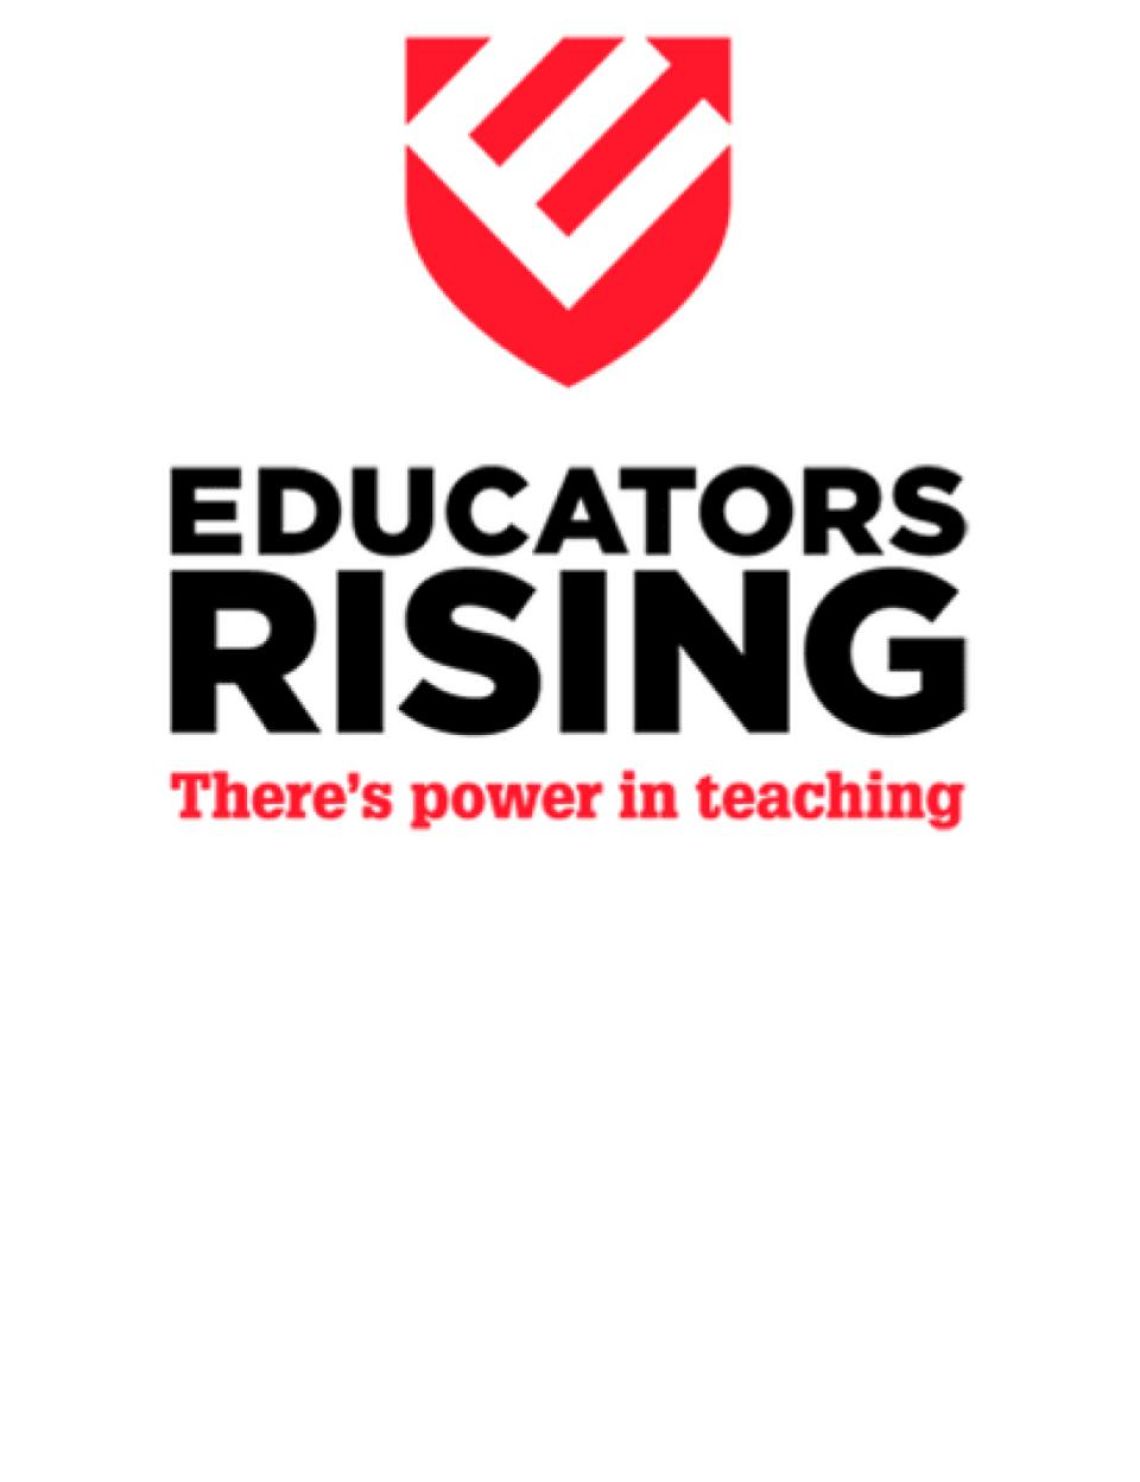 Educators Rising Logo with words Educators Rising: There's power in teaching